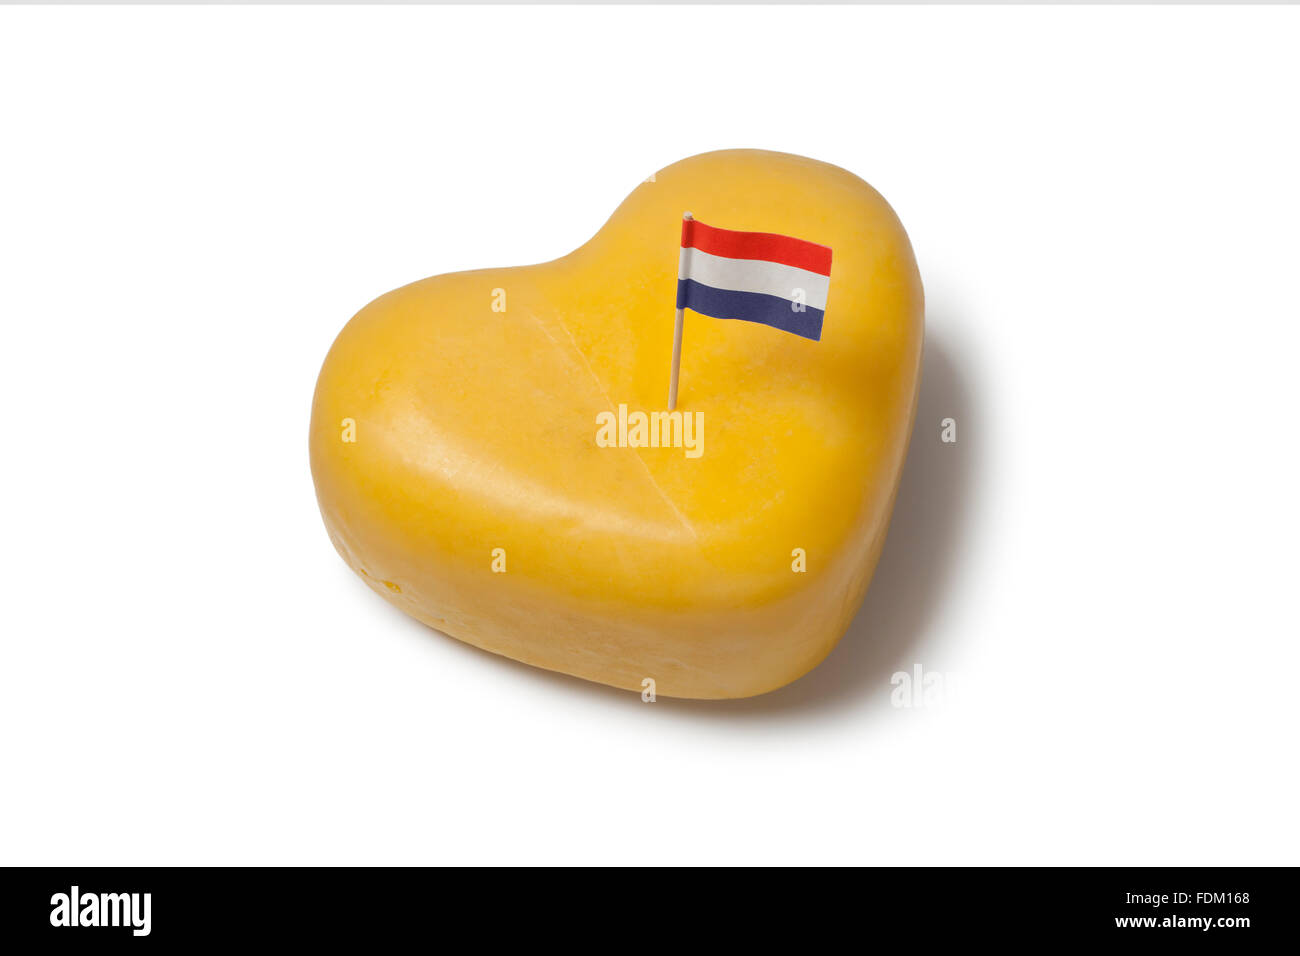 Heart shaped Gouda cheese with Dutch flag on white background Stock Photo